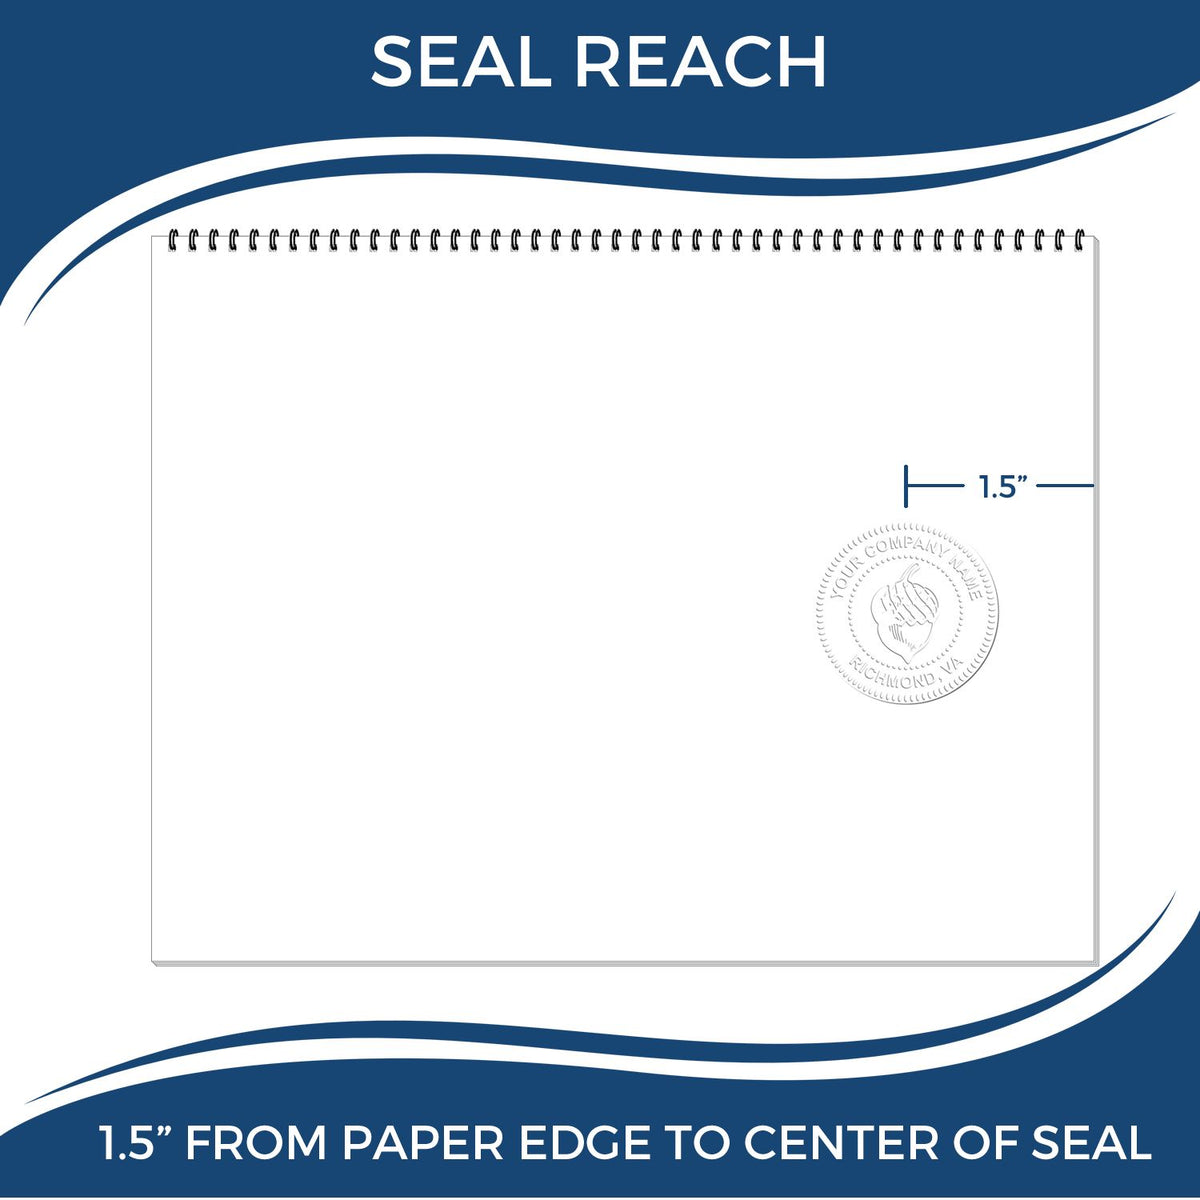 An infographic showing the seal reach which is represented by a ruler and a miniature seal image of the State of Alaska Soft Land Surveyor Embossing Seal